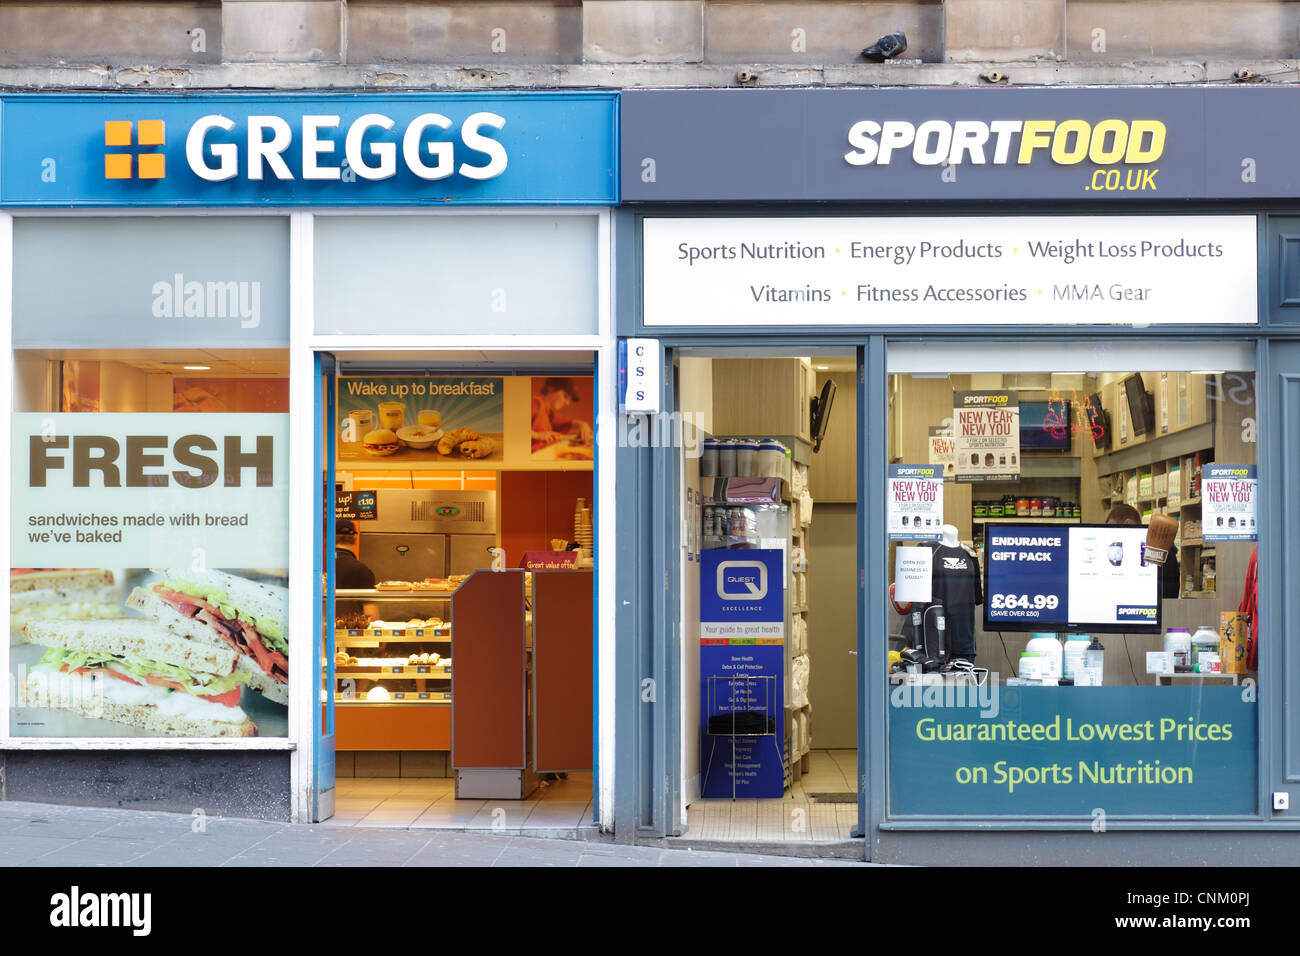 This Sport food shop is permanently closed. Greggs takeaway next door to a Sportfood shop, Scotland, UK. Stock Photo